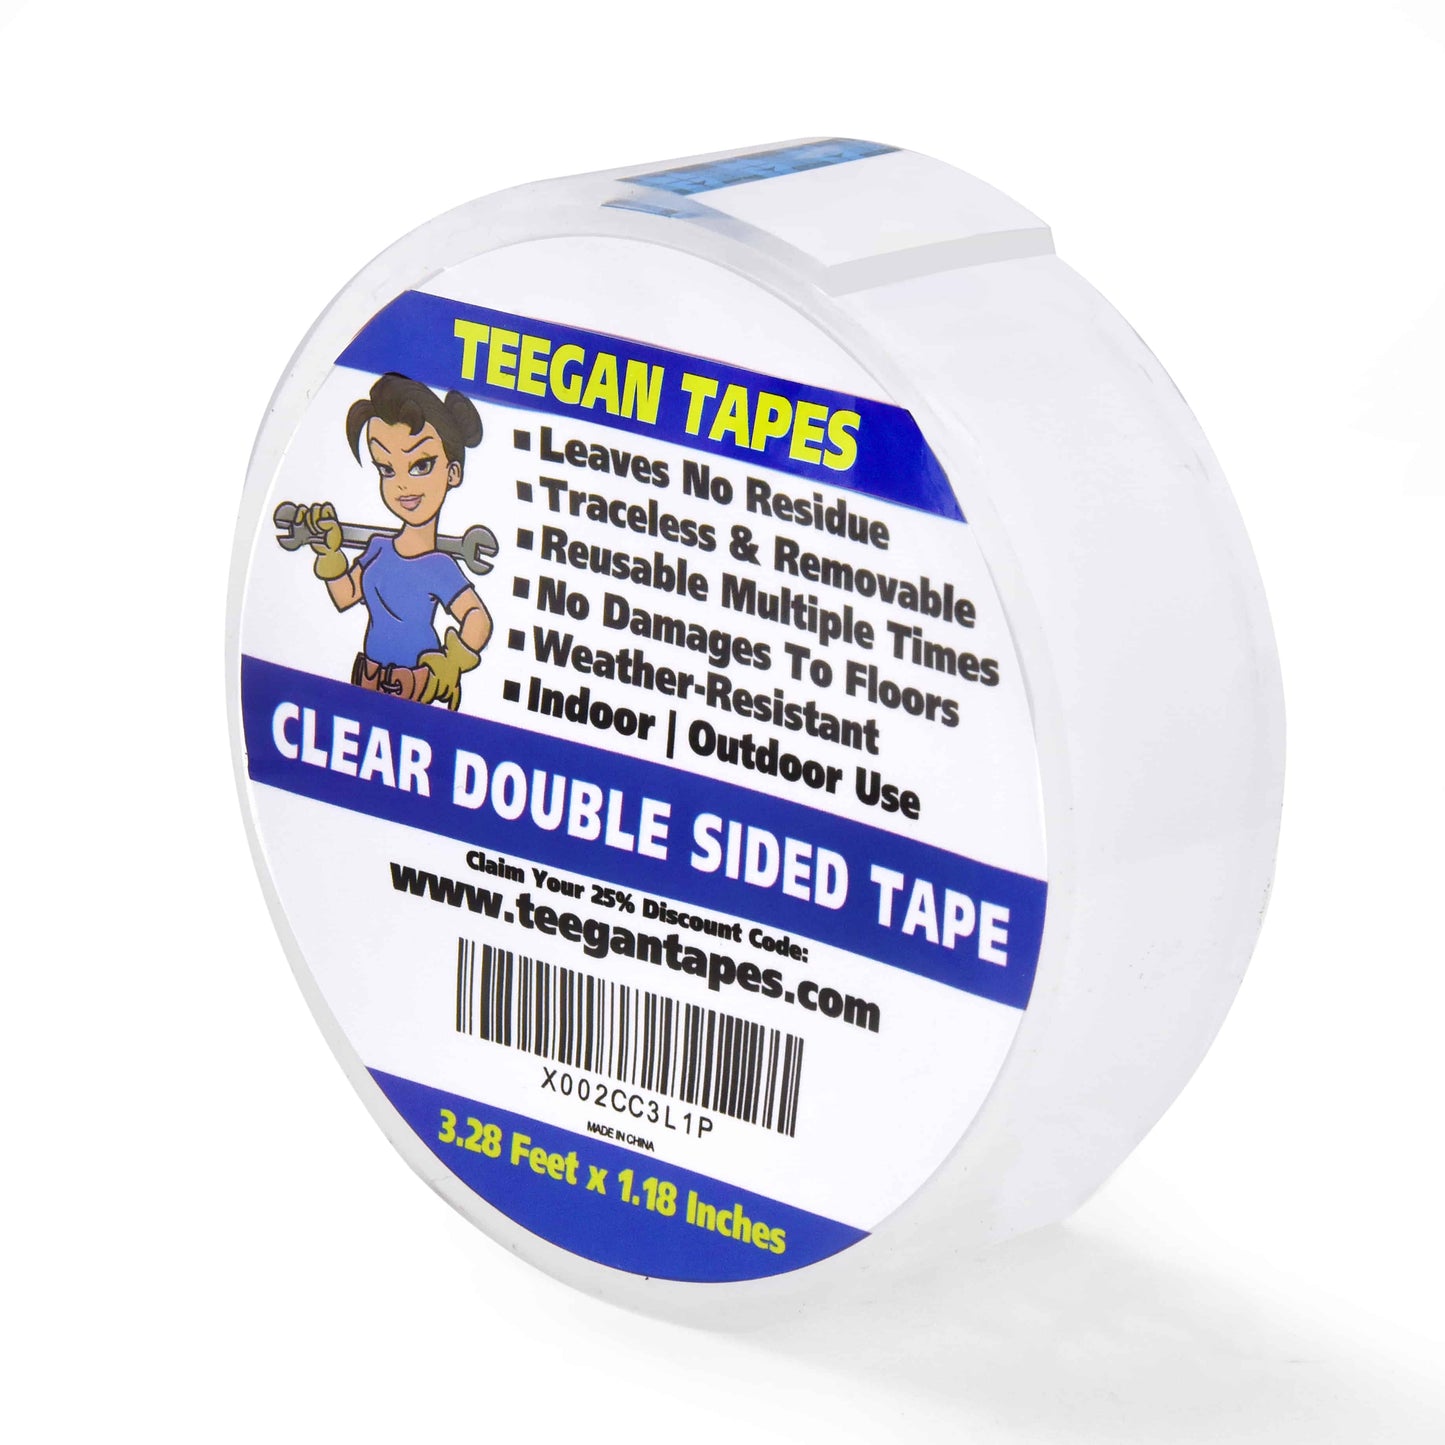 FRCOLOR 5 Sheets Double Sided Tapes Clear Duct Tape Double-Sided Tape Heavy  Duty Clear Tape Heavy Duty Tape Double Face Tape Heavy Duty Duct Tape  Doublesided Tape One Sheet Nail Plastic 